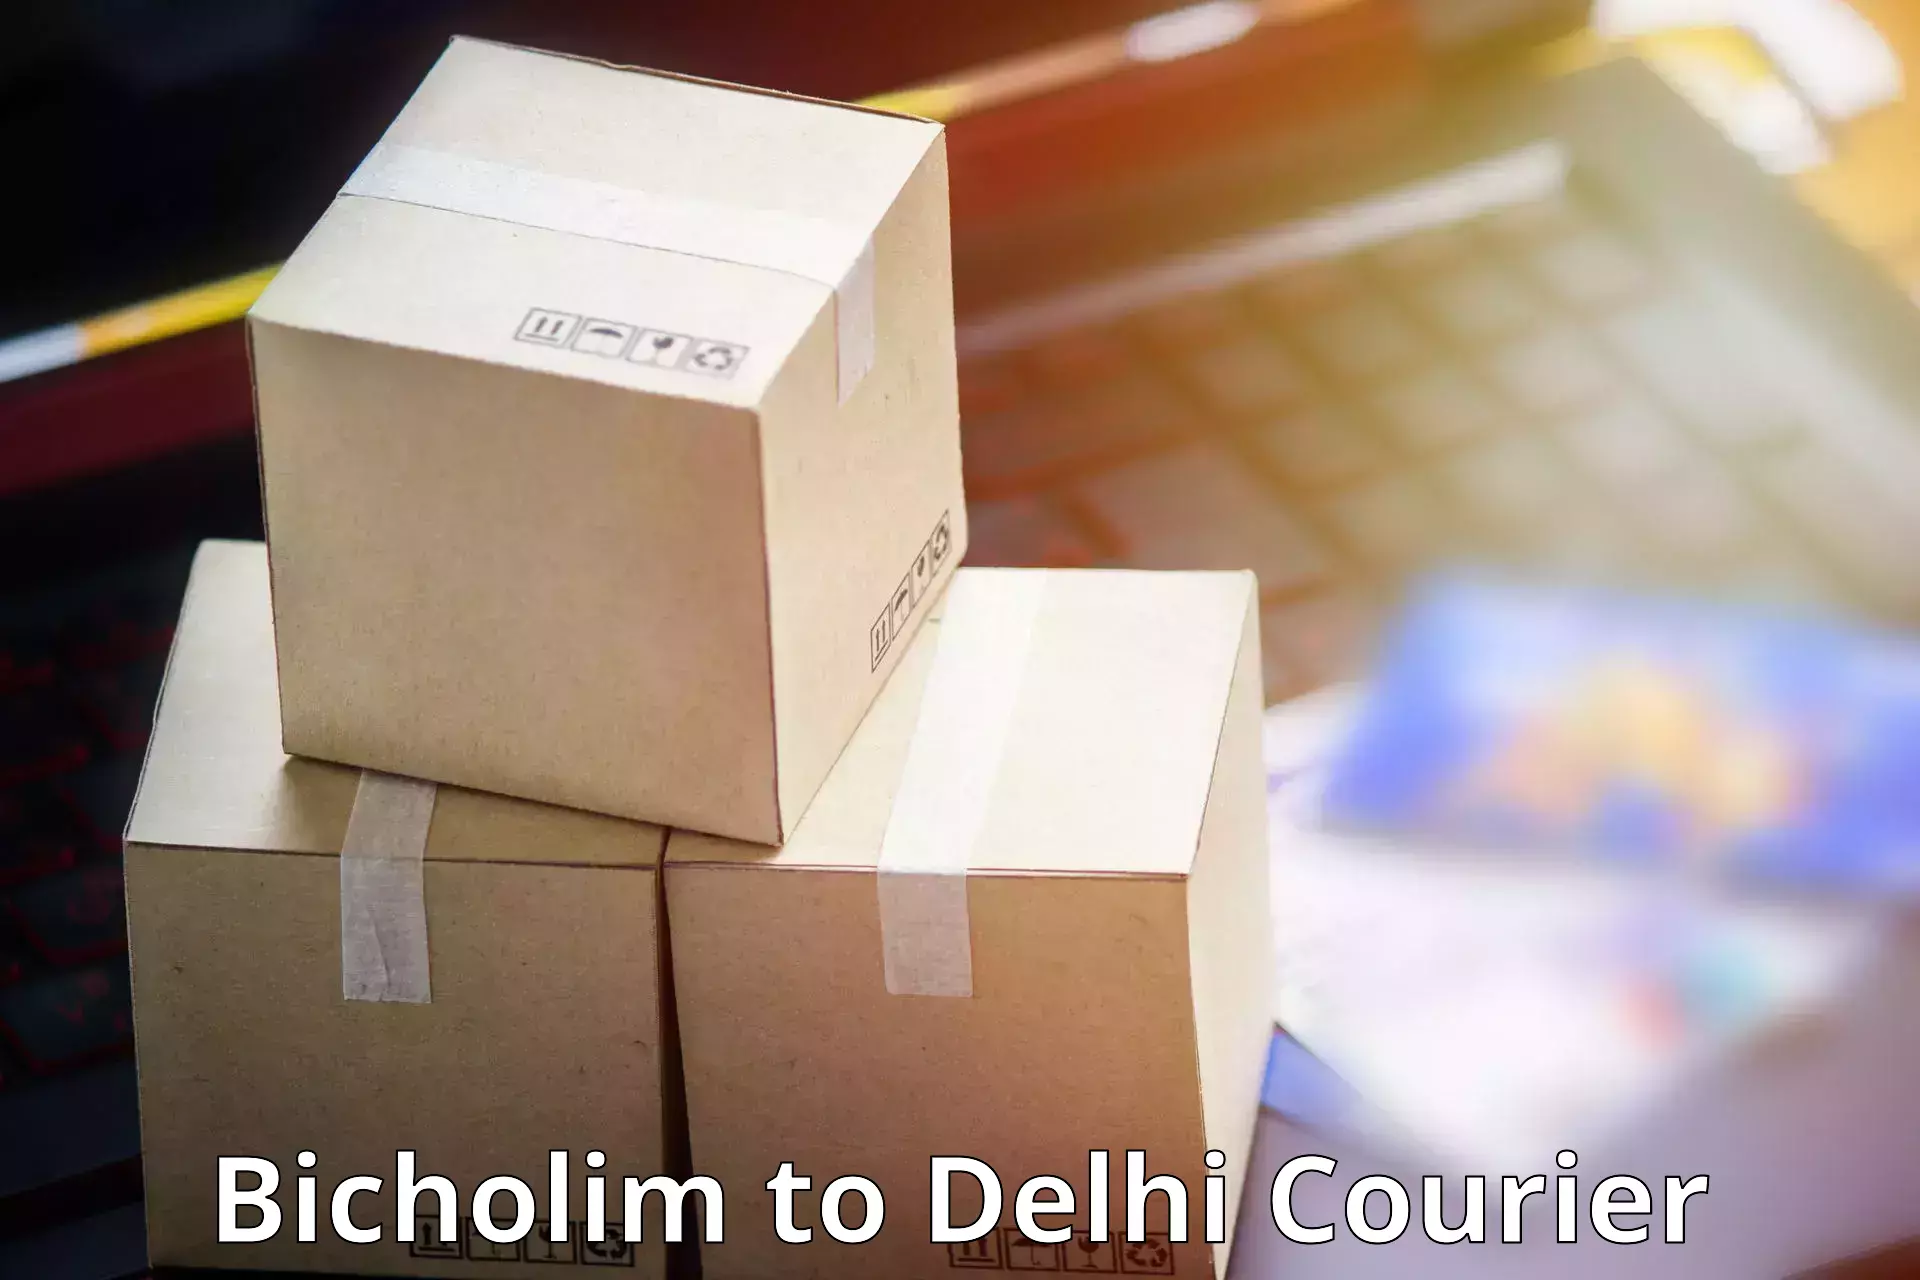 Next-day freight services Bicholim to NCR